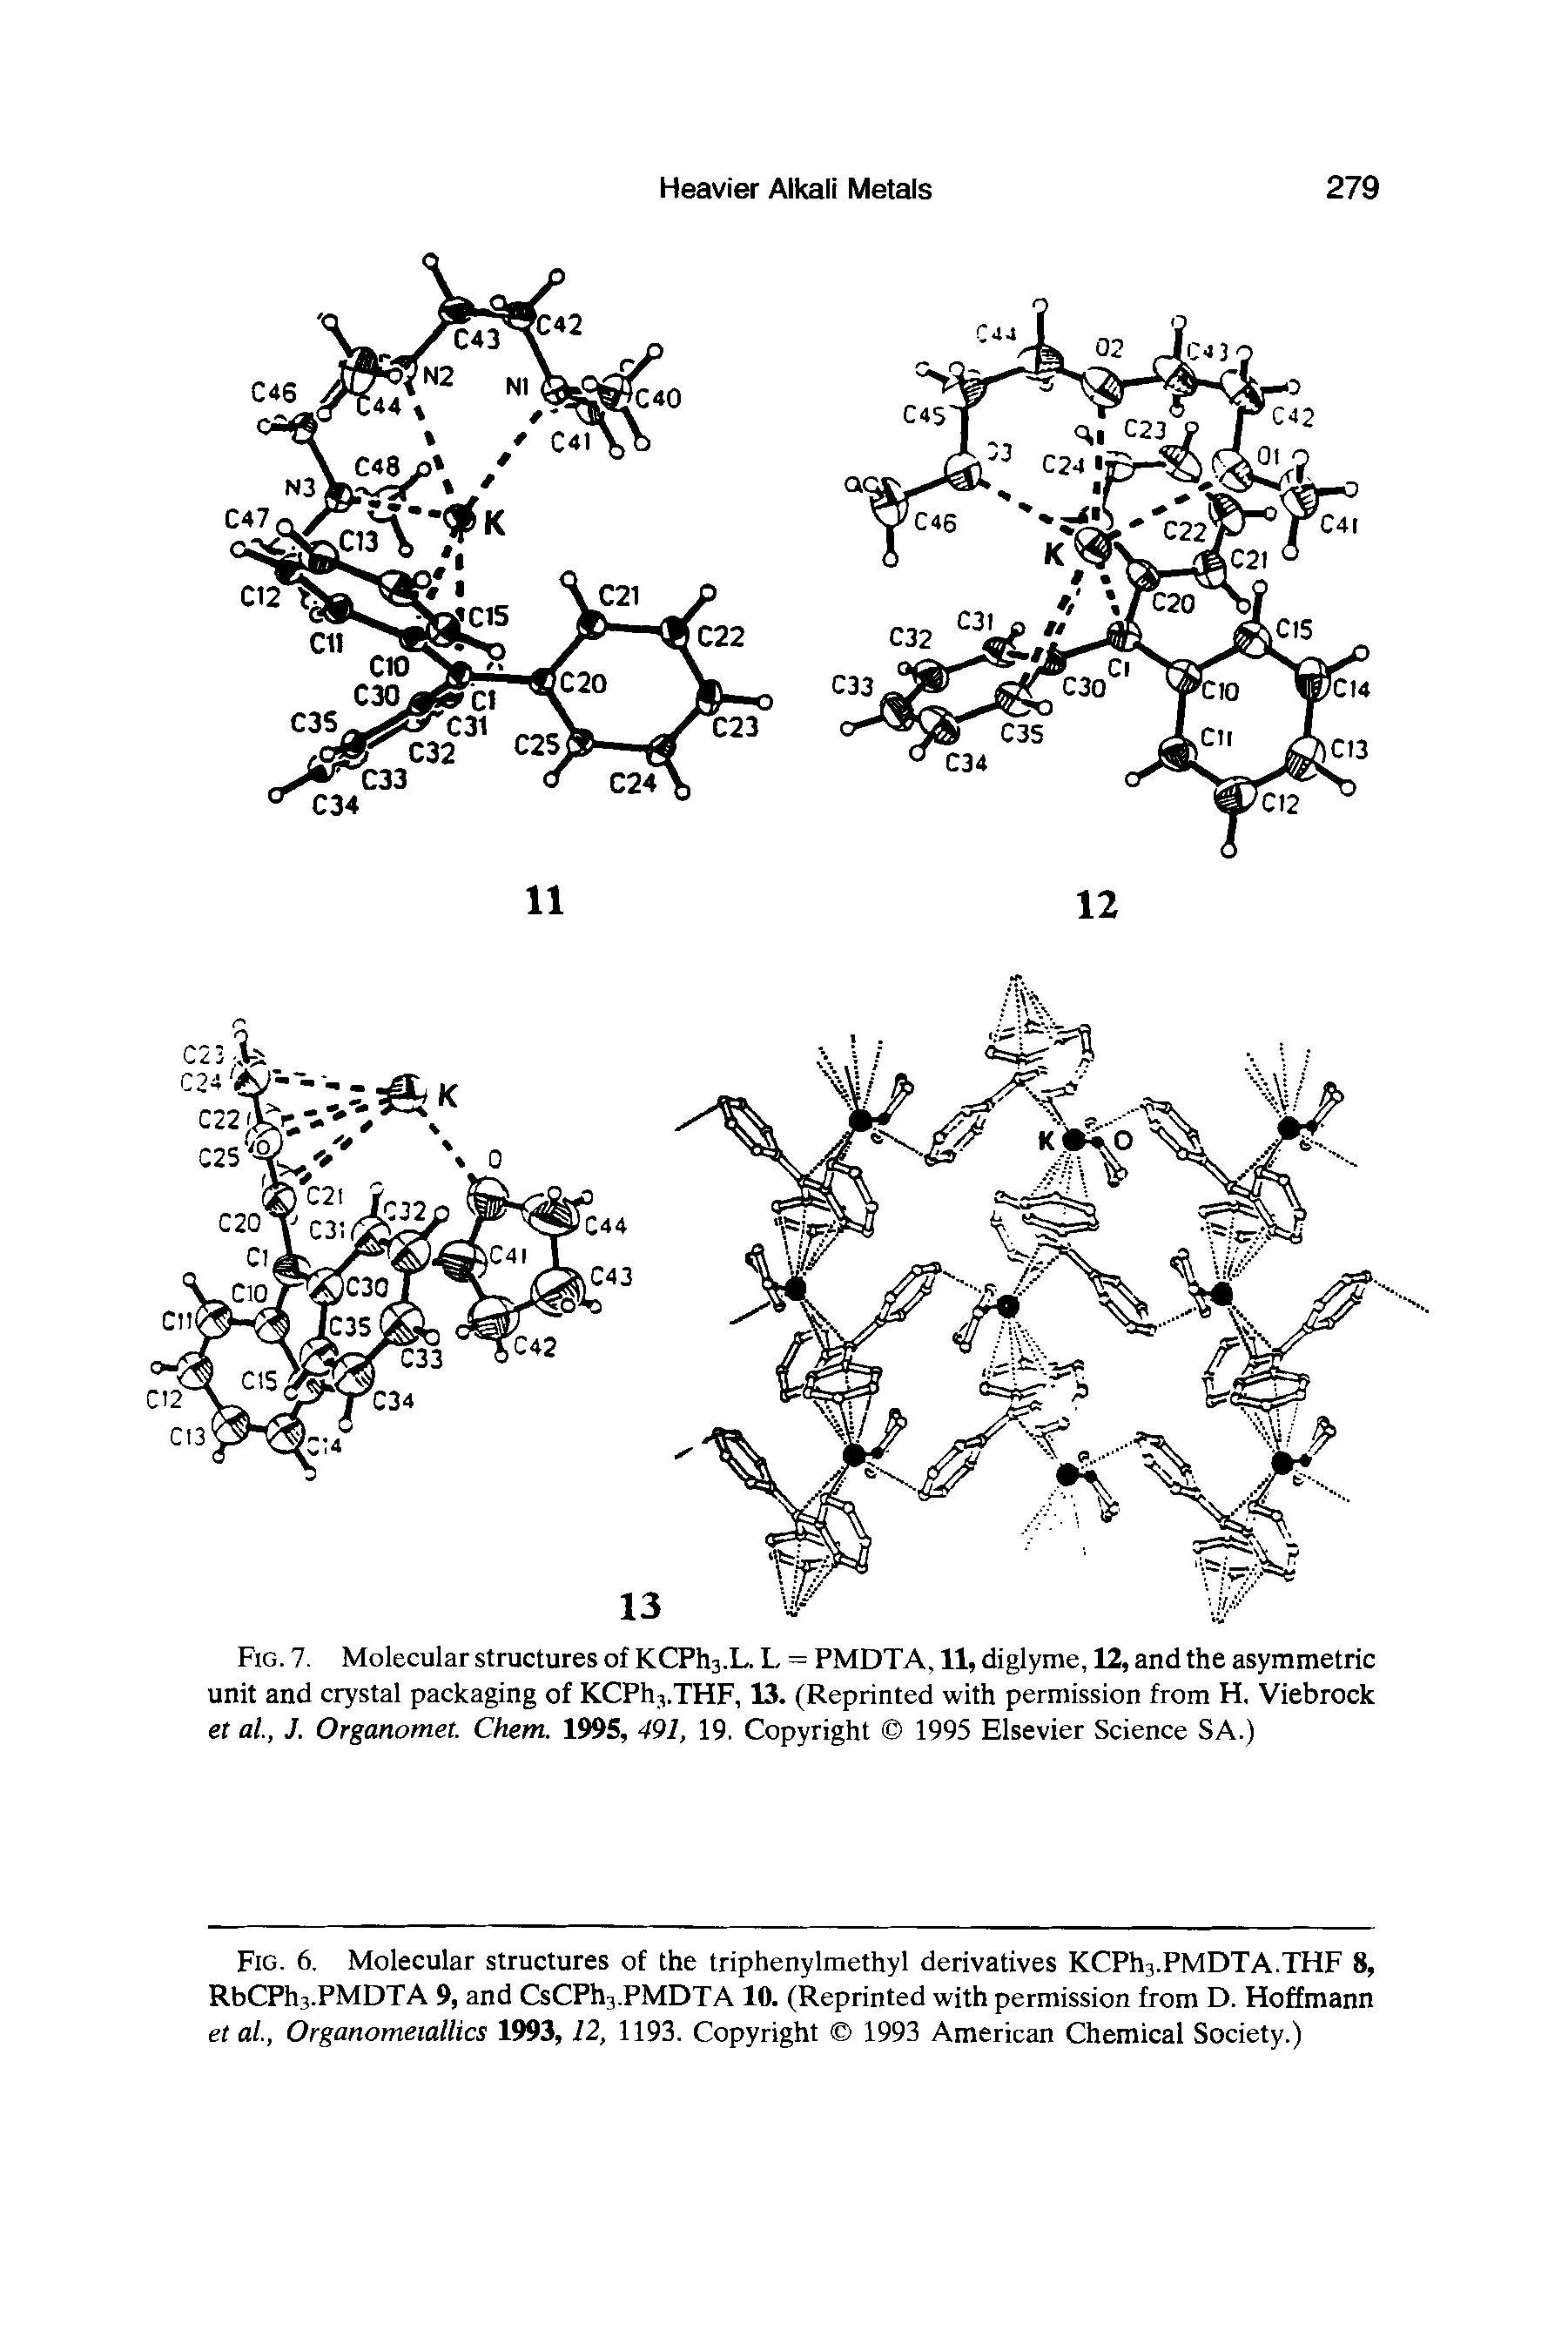 Fig. 7. Molecular structures of KCPh3.L. L = PMDTA, 11, diglyme, 12, and the asymmetric unit and crystal packaging of KCPh,.THF, 13. (Reprinted with permission from H. Viebrock ef al., J. Organomet. Chem. 1995, 491, 19. Copyright 1995 Elsevier Science SA.)...